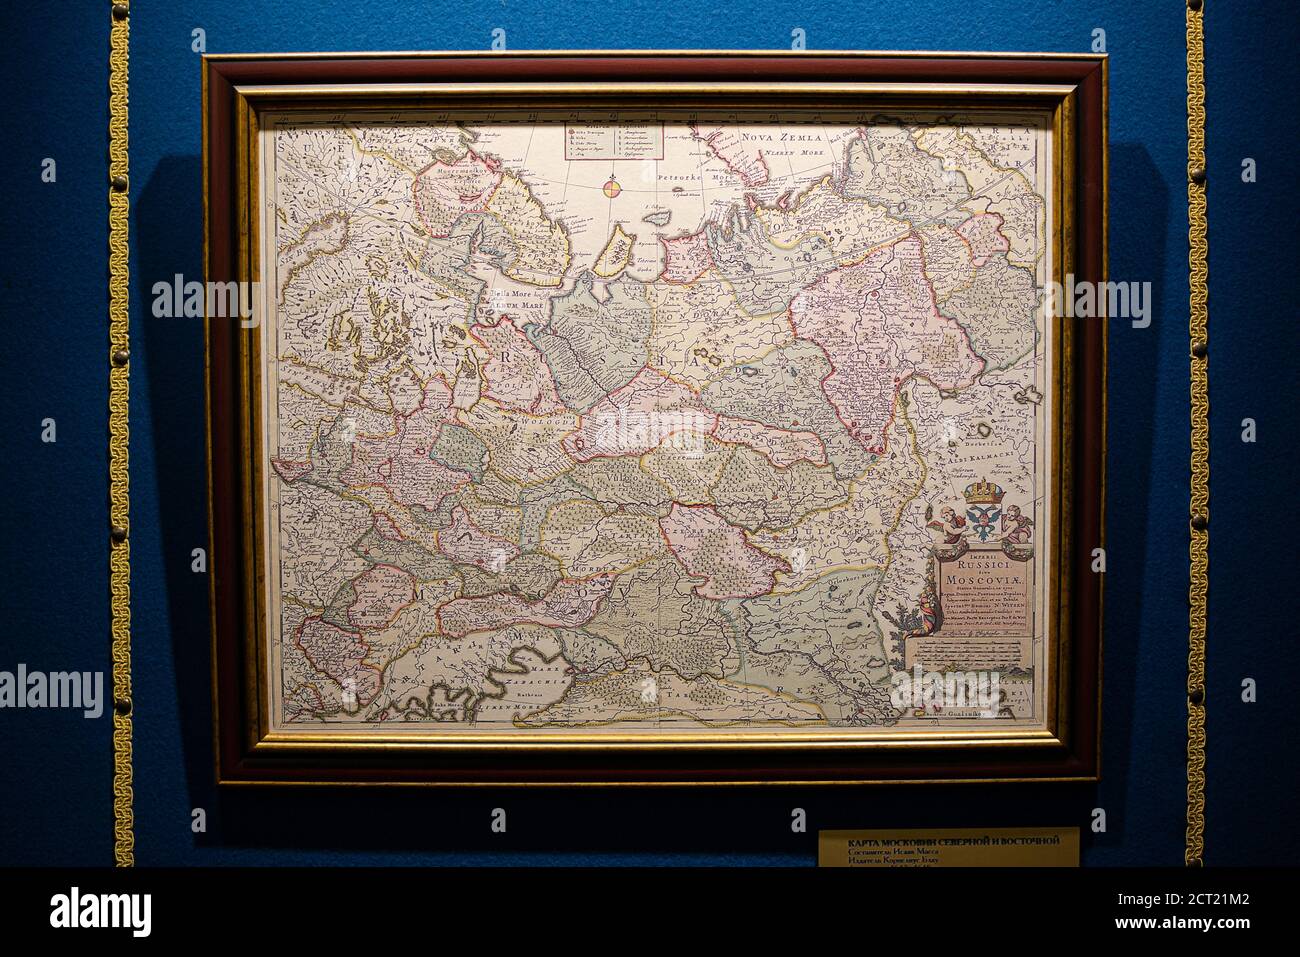 Moscow, Russia - September 5, 2020. Map of northern and eastern Muscovy 1642-1648, Tsardom of Russia of 17th century. Photo taken in the Palace of Tsa Stock Photo